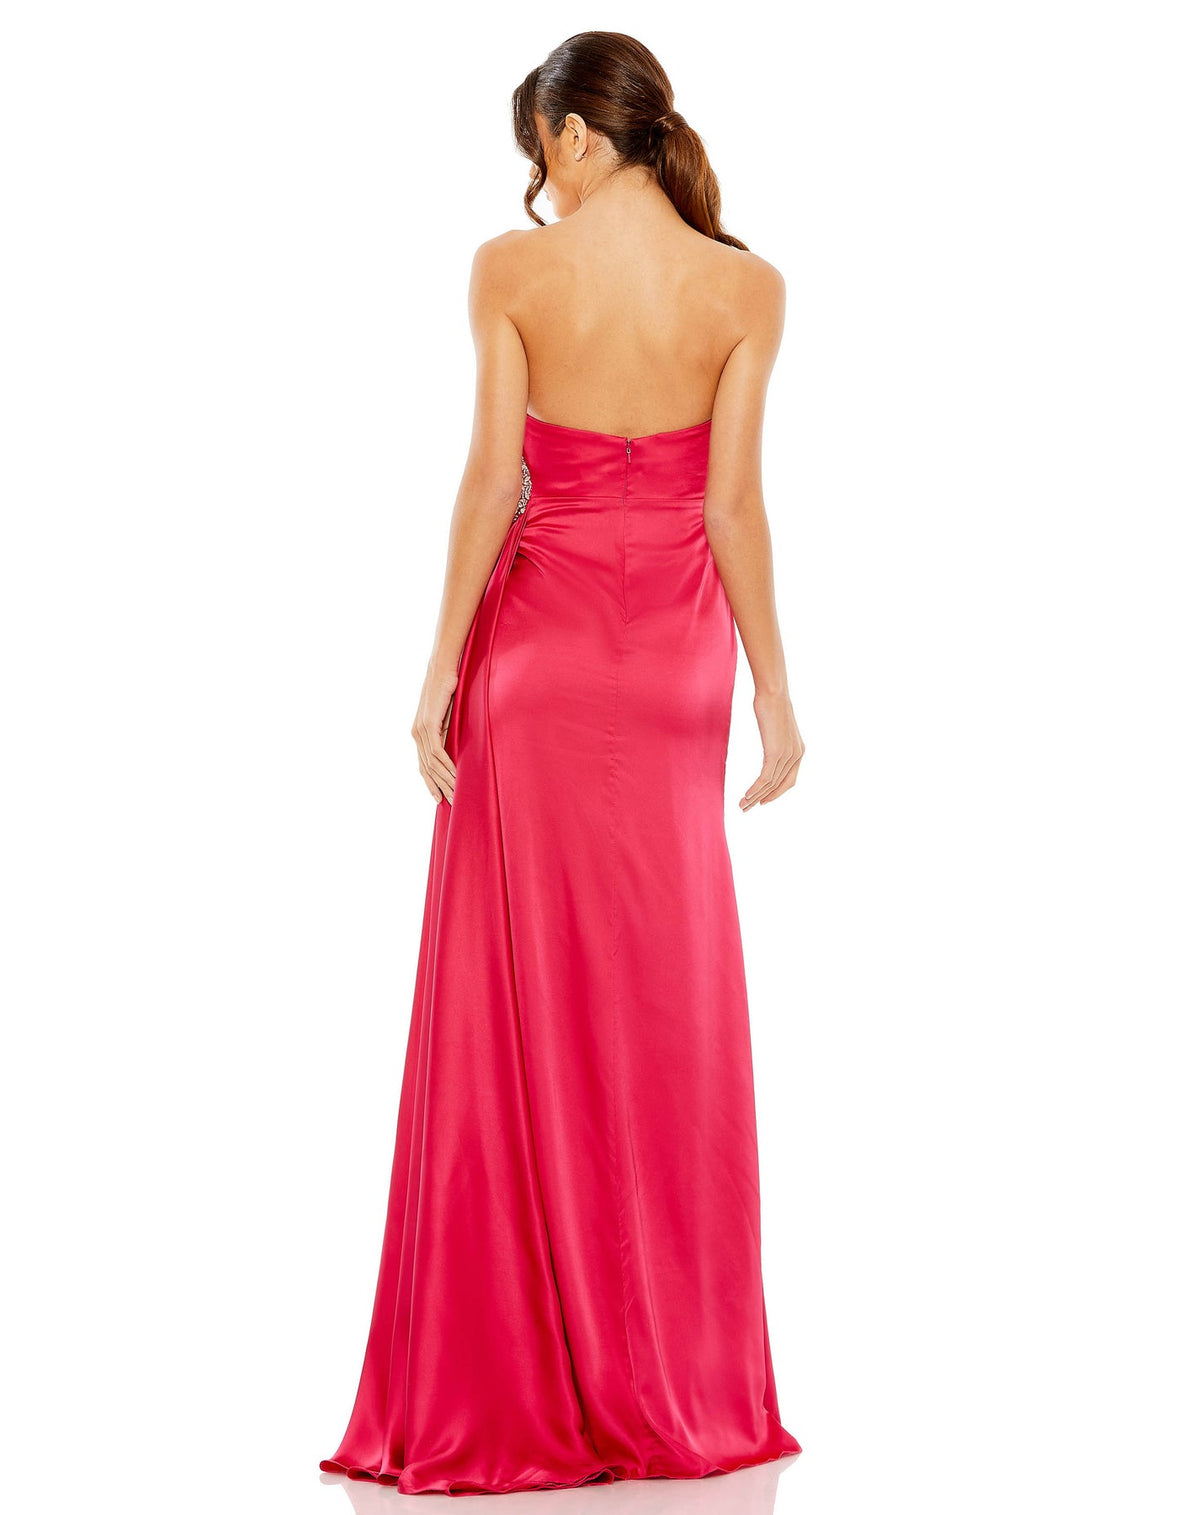 Mac Duggal Style #11691 Strapless ruched corset crystal embellished gown - Pink backless dress